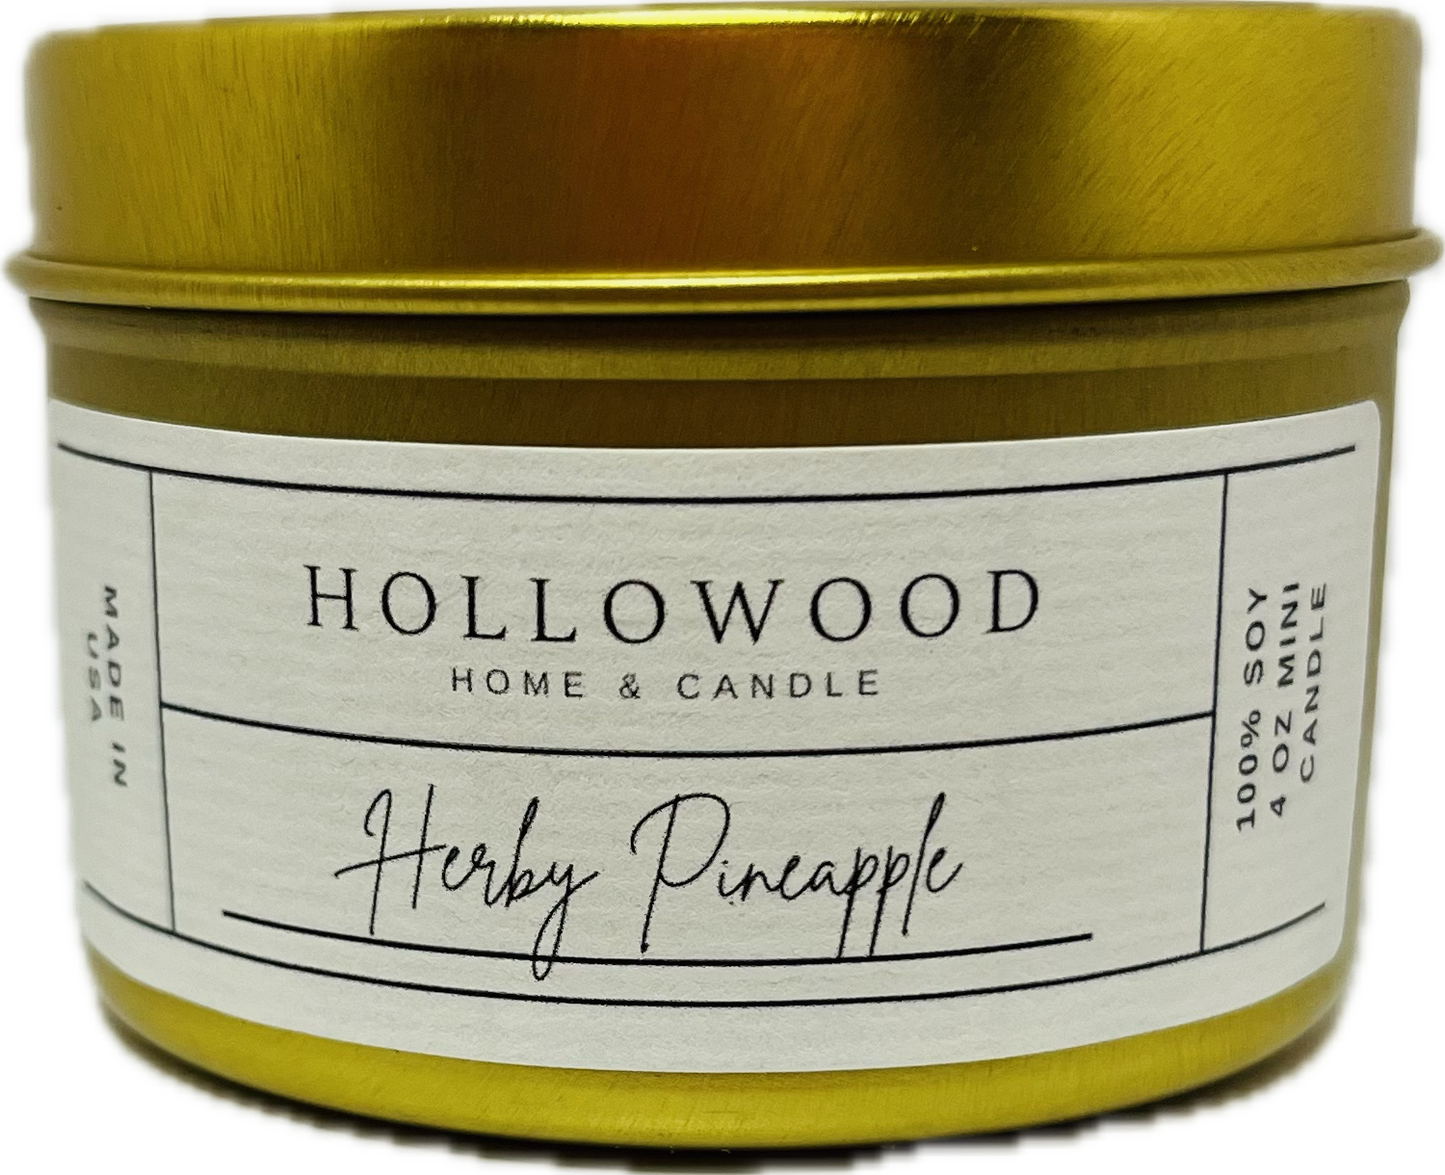 Hollowood Herby Pineapple 4oz